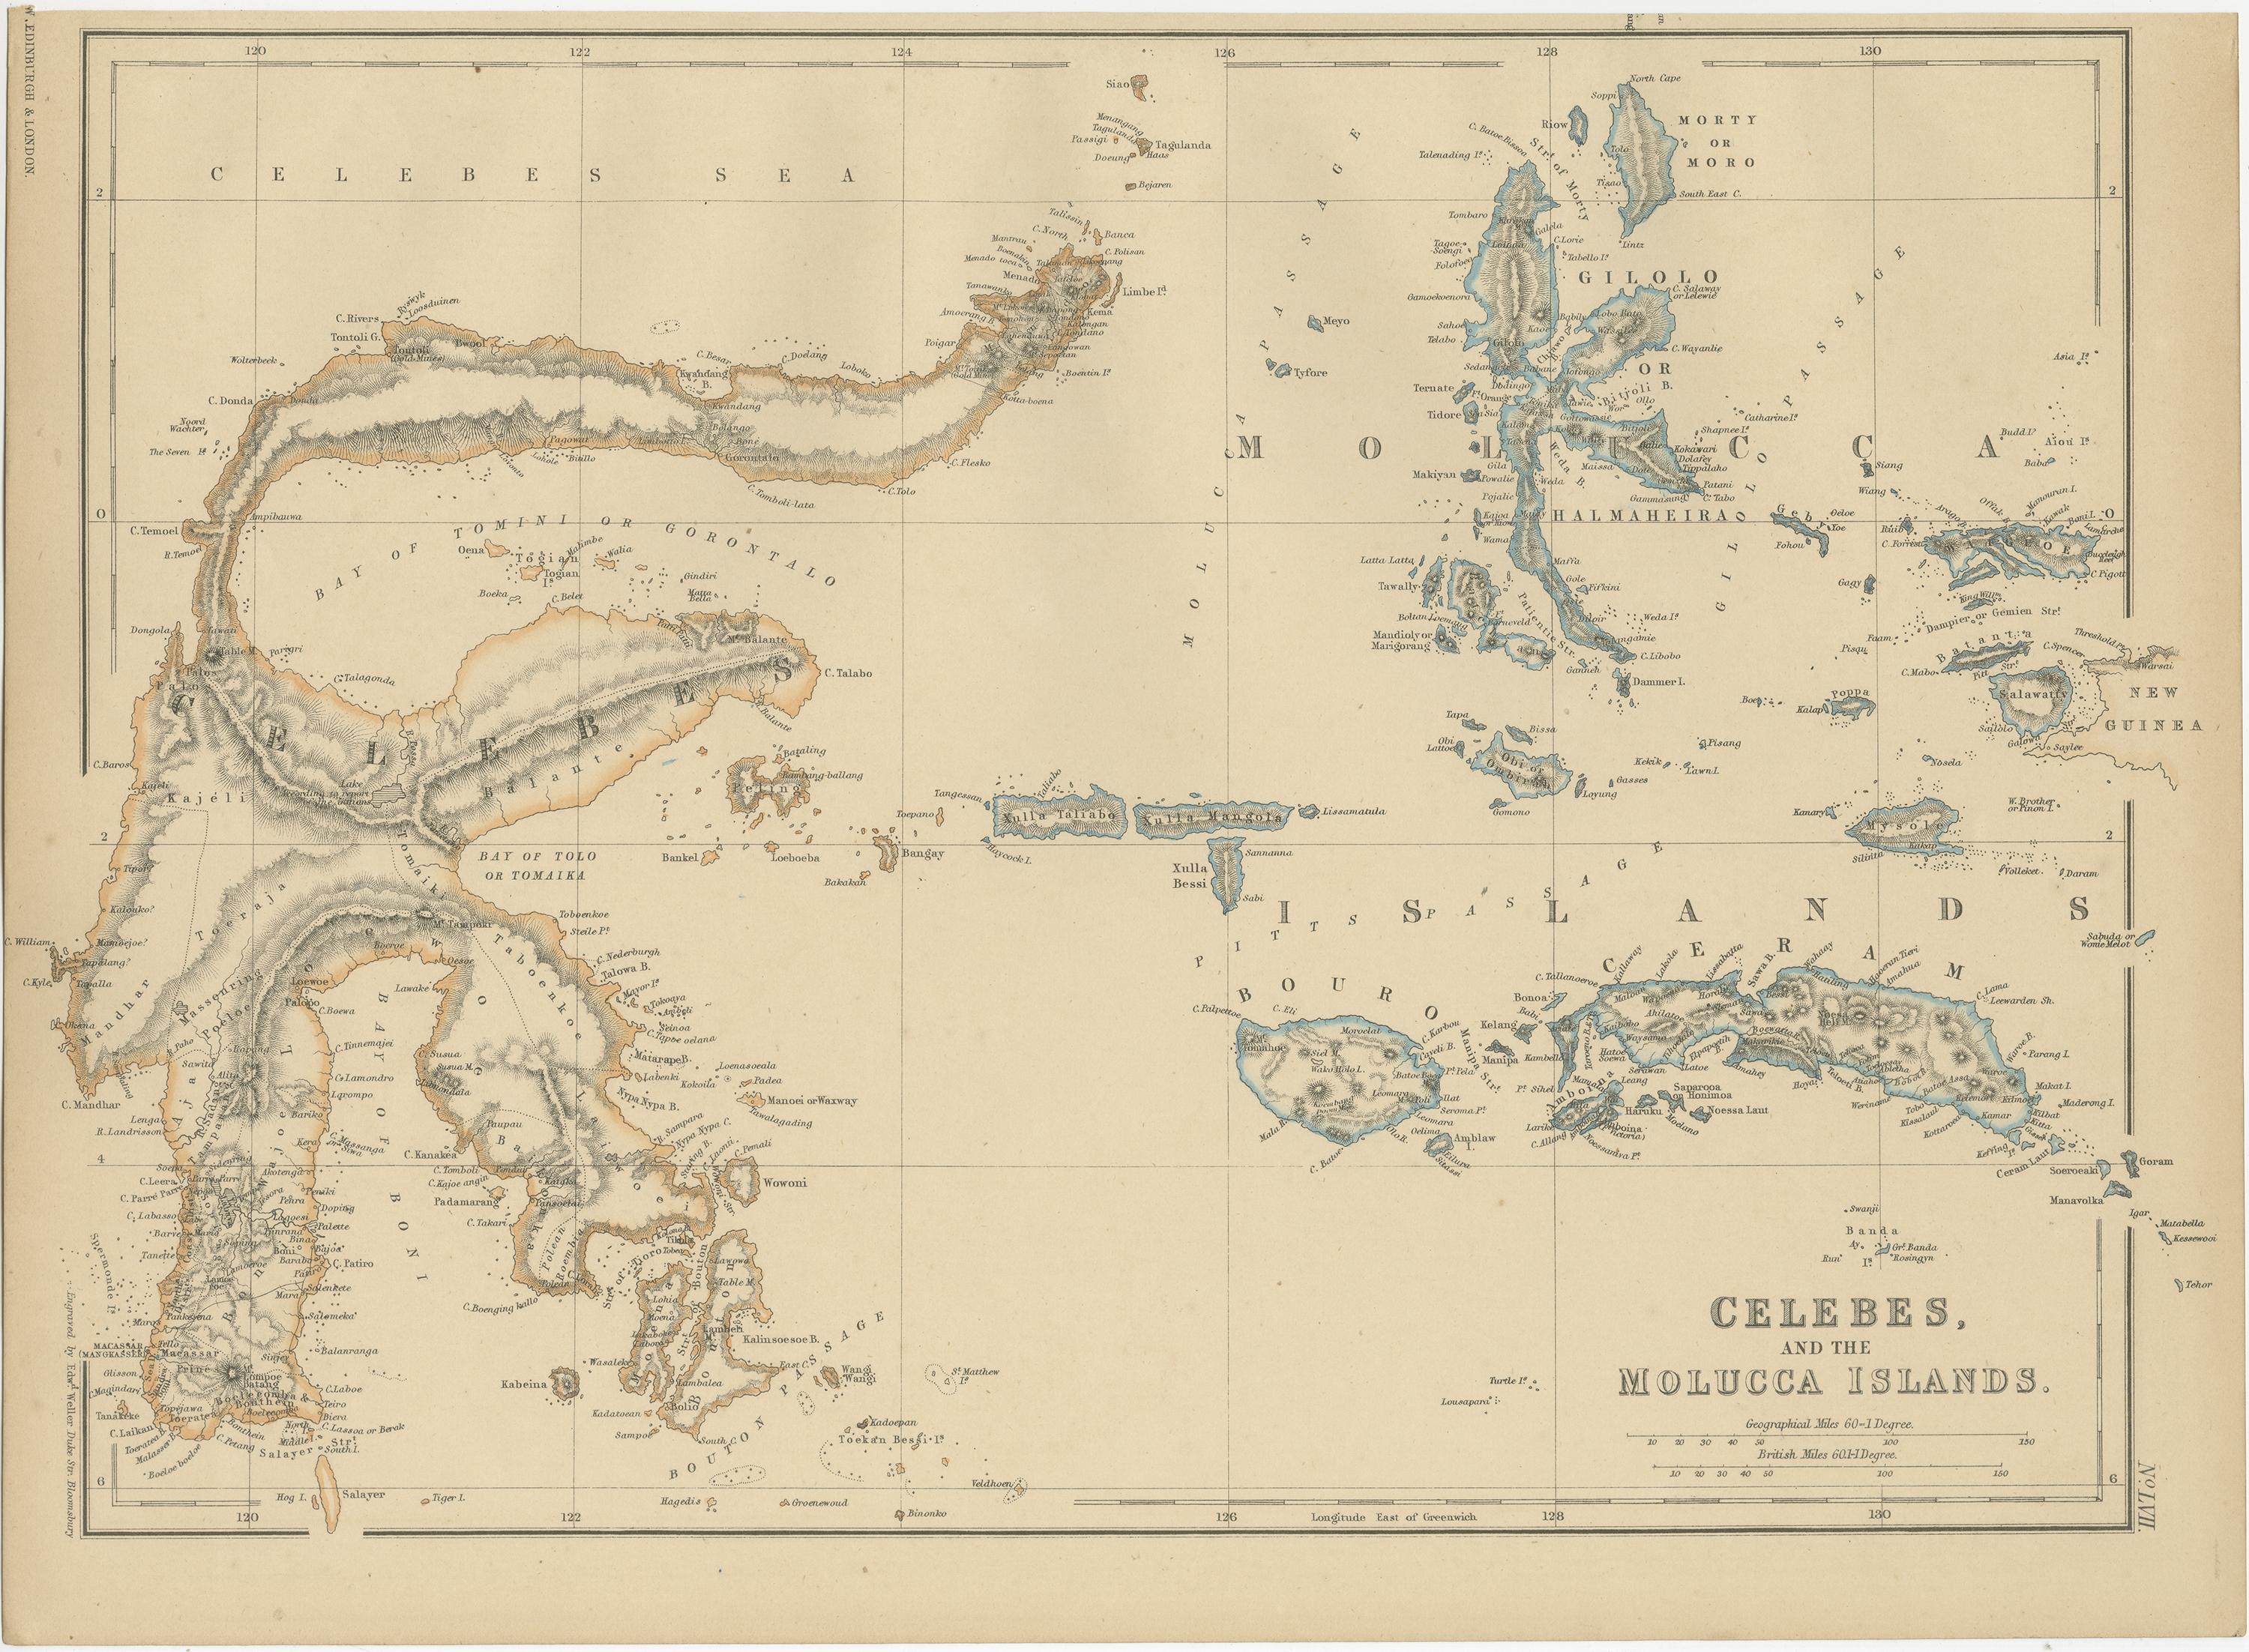 Antique map titled 'Celebes and The Molucca Islands '. Original antique map of Celebes and the Maluku Islands (Moluccas). This map originates from ‘The Imperial Atlas of Modern Geography’. Published by W. G. Blackie, 1859.